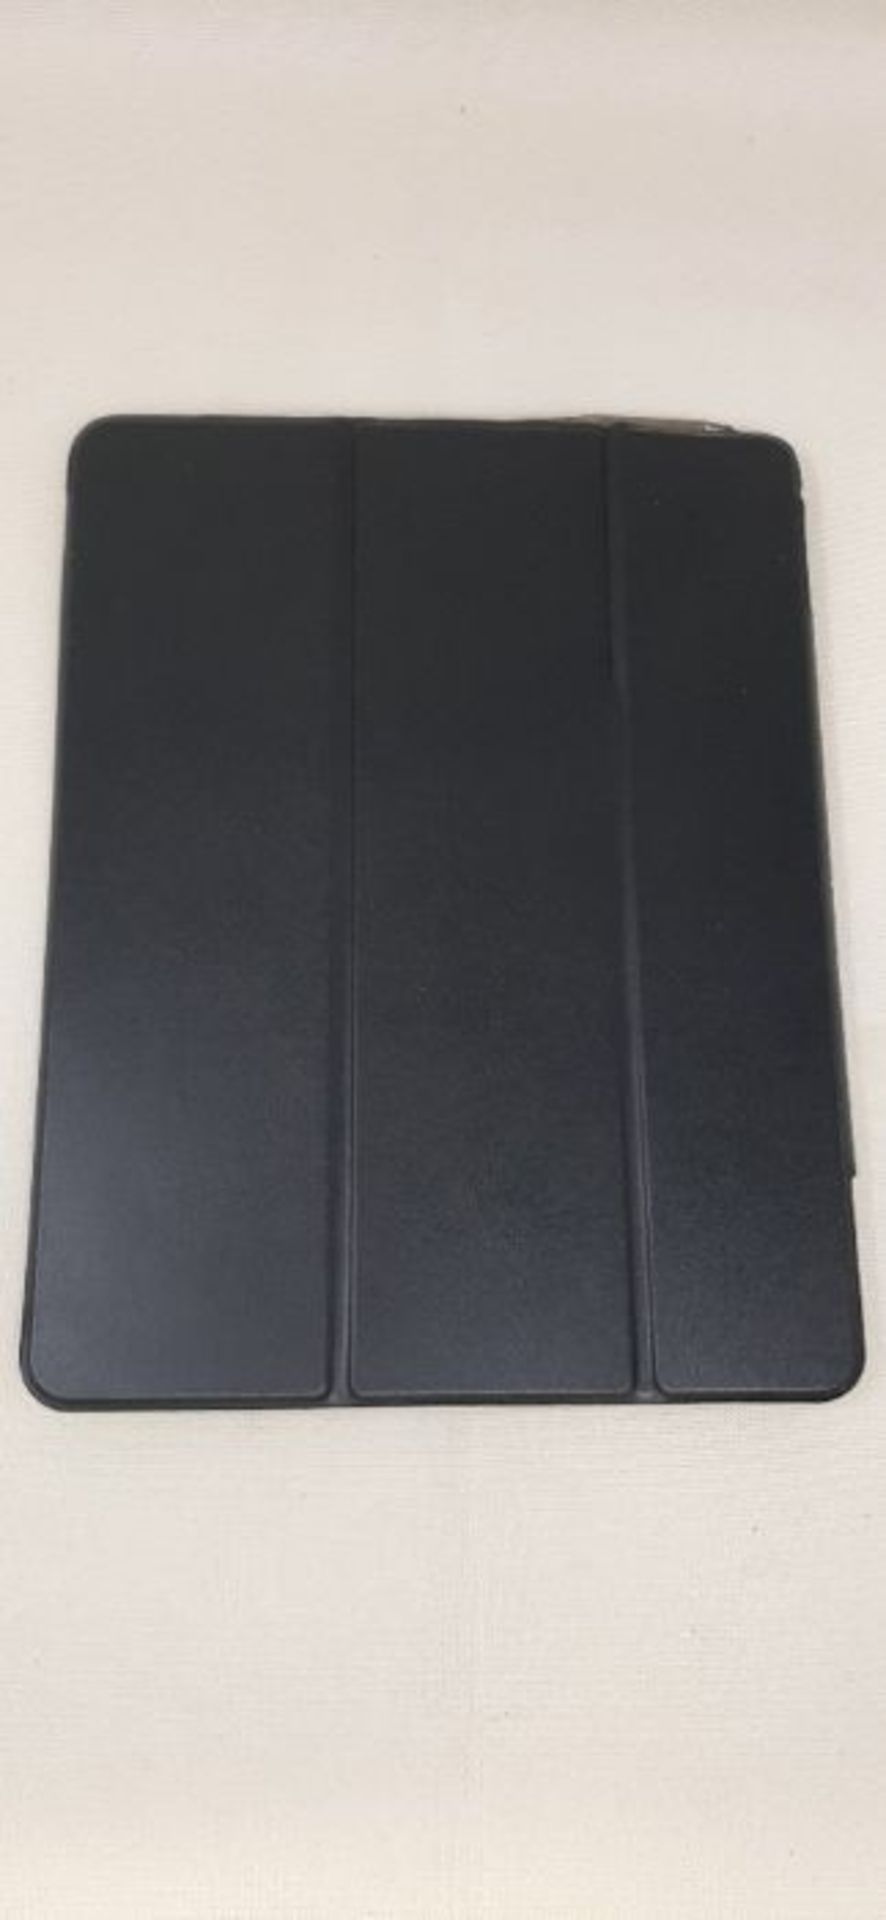 ESR Case Compatible with iPad Pro 12.9 Inch 2021 (5th Generation, 5G), Translucent Sta - Image 2 of 3